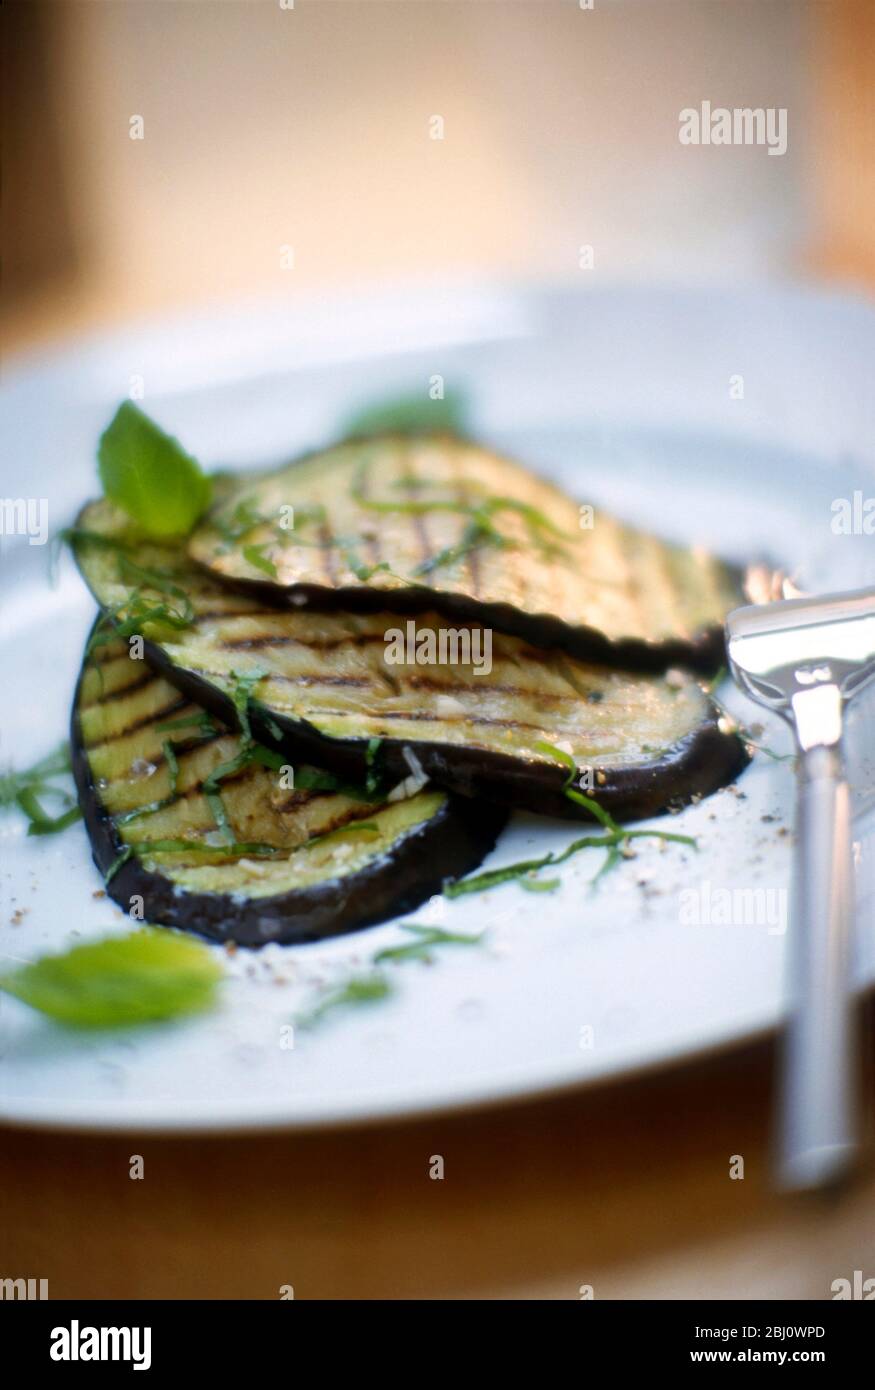 Salad of grilled aubergine slices dressed with oil and vinegar and shredded basil leaves - Stock Photo